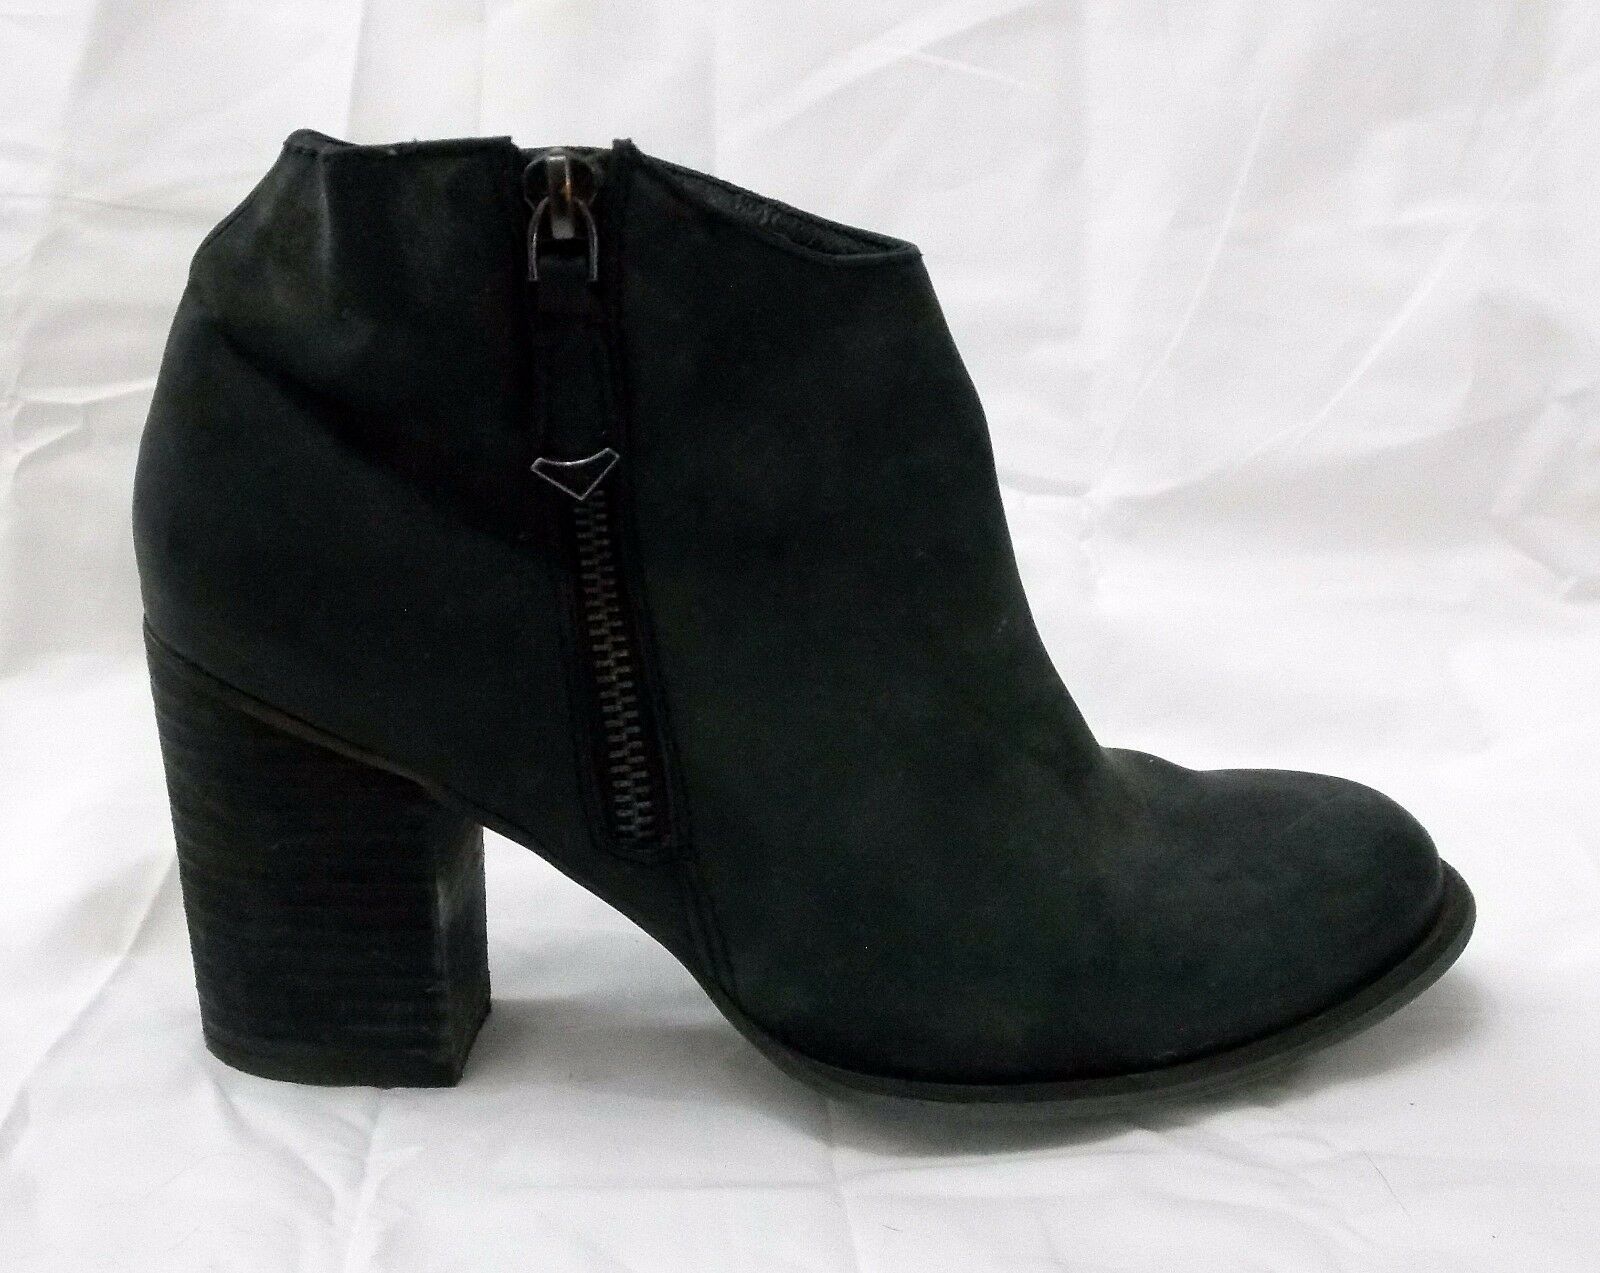 Primary image for Aldo Ankle Booties Nubuck Suede Chunky Heel Boot Bootie Black size 8